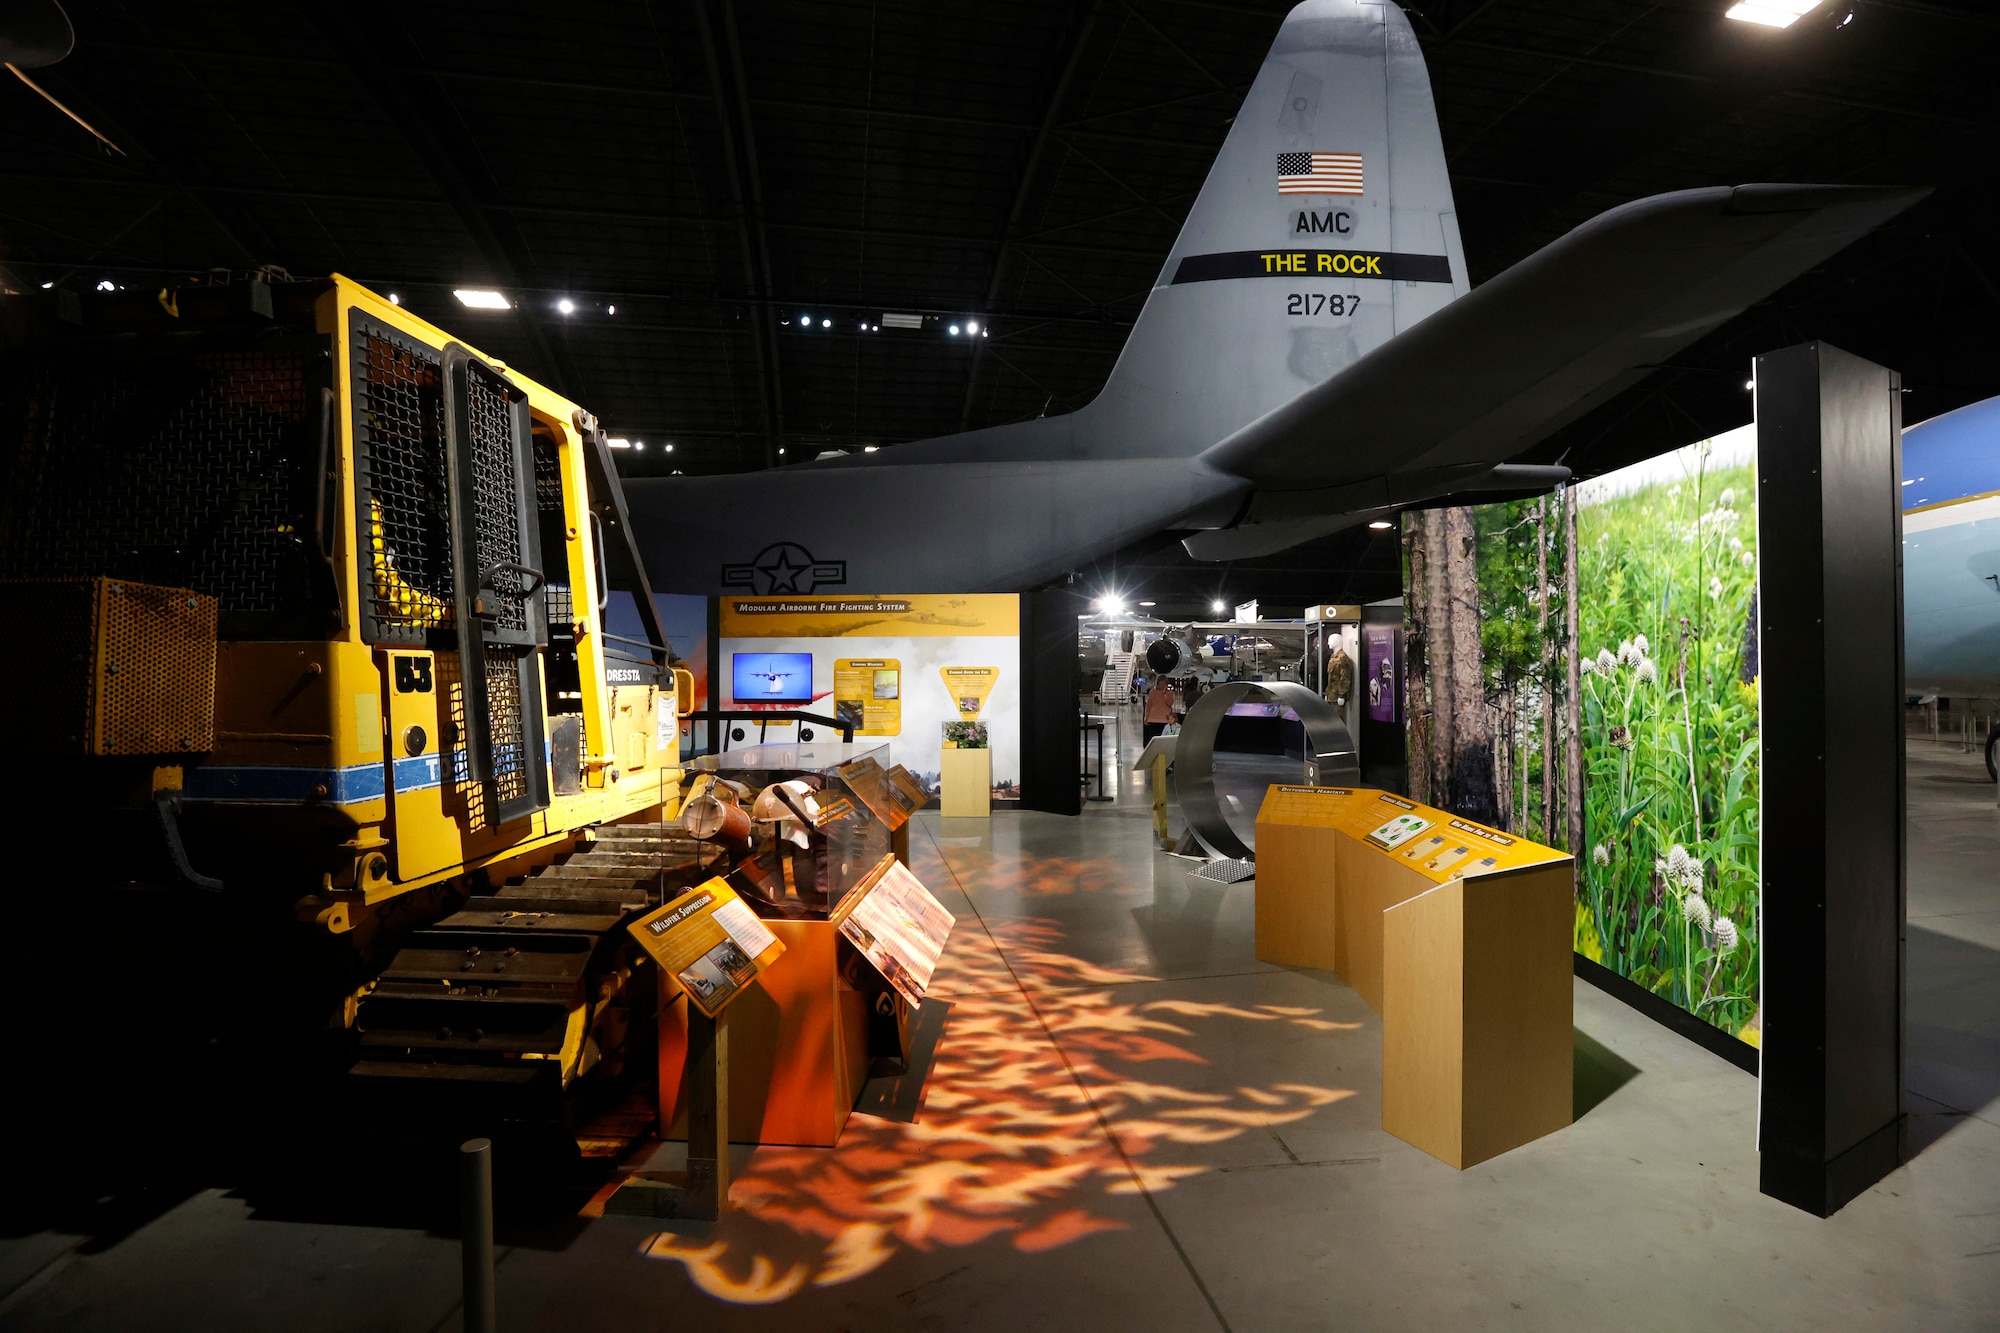 Image of the Global Firefighting mission of the USAF in the Humanitarian exhibit. Features a bulldozer on the left with a lighted image on the floor replicataing fire.